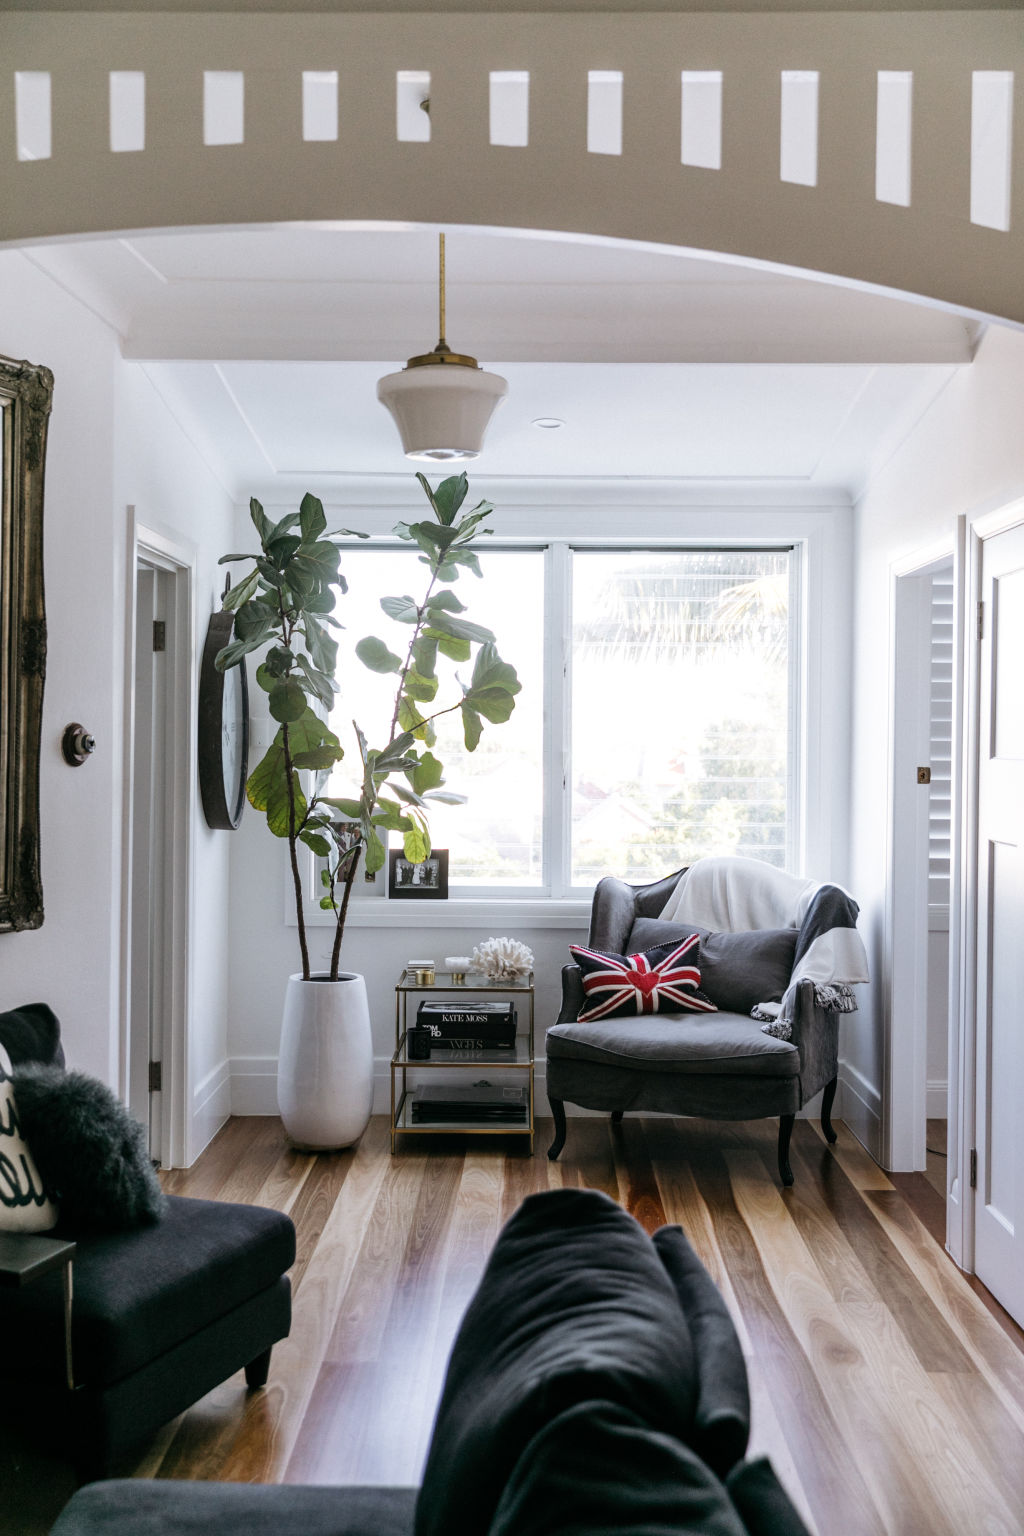 King wanted to create an open and liveable downstairs area to allow for an indoor and outdoor vibe. Photo: Caroline McCredie